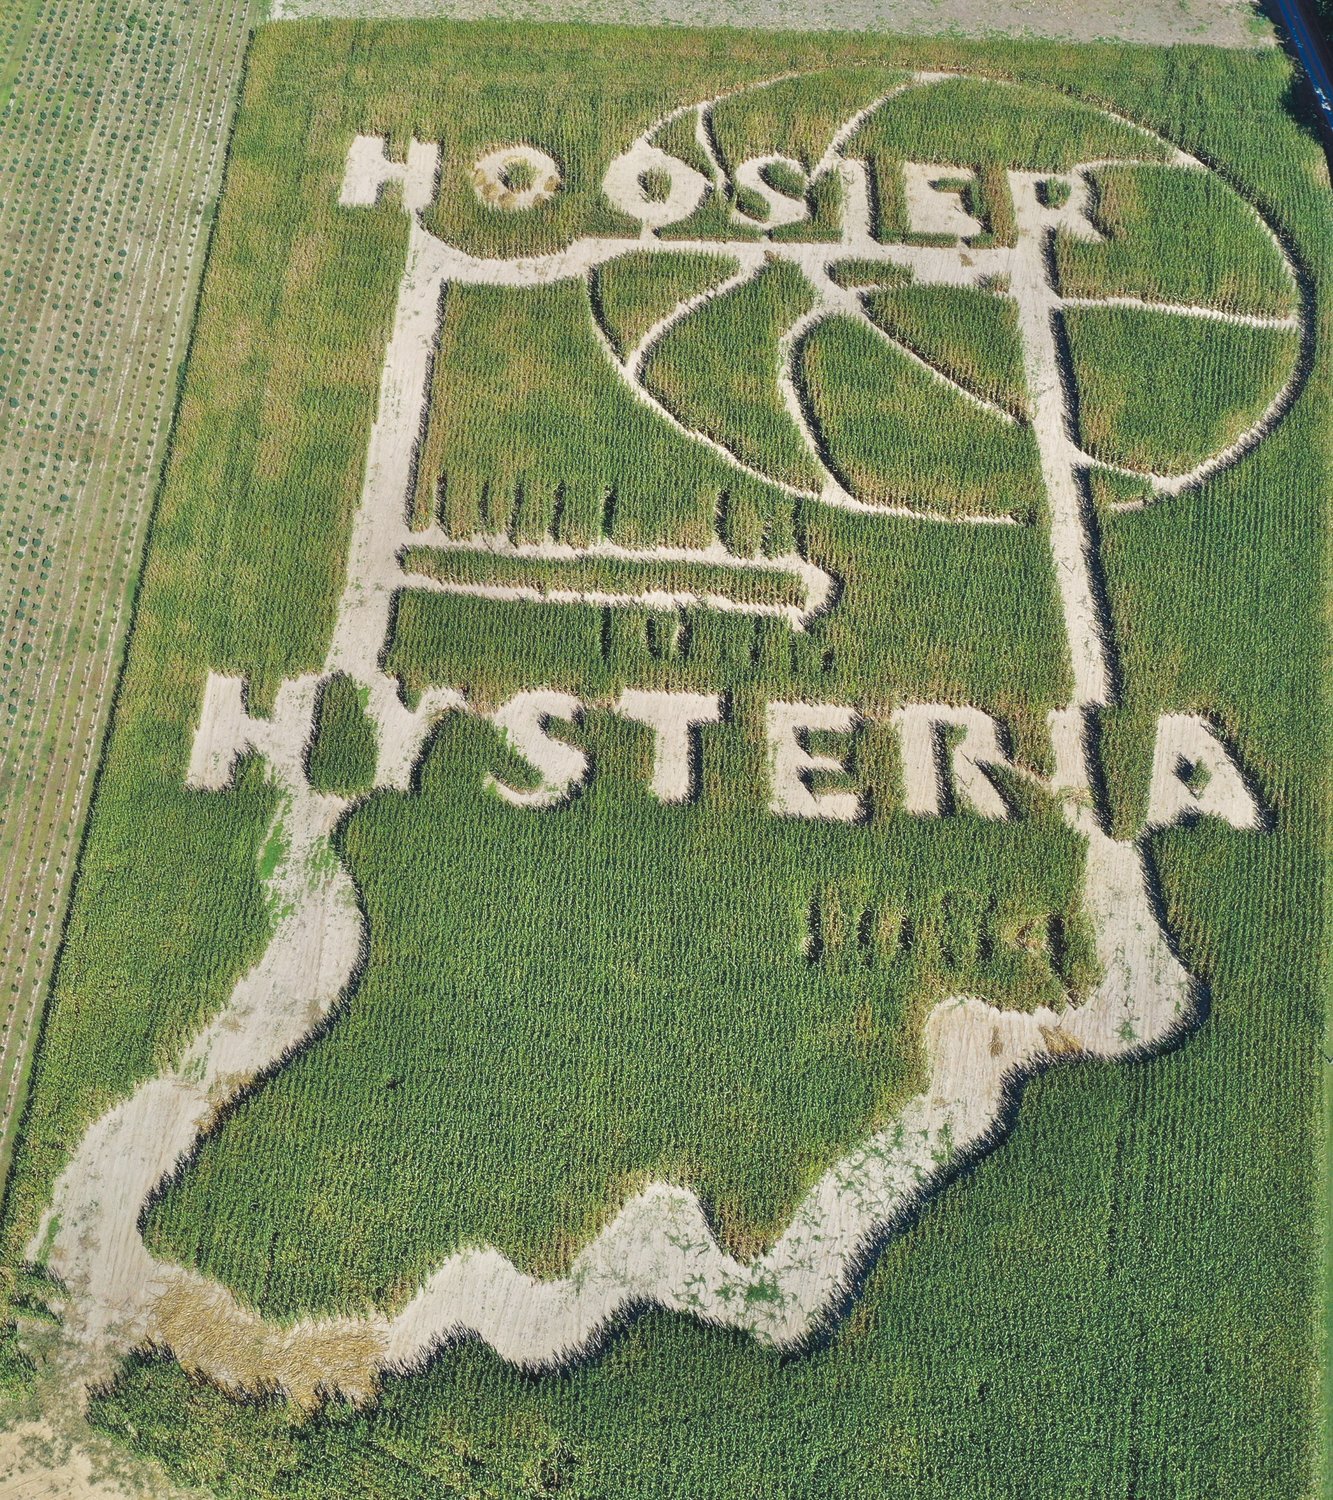 Oak Hill Tree Farm and Pumpkin Patch honors Indiana High School Basketball with their 2020 corn maze, which celebrates Hoosier Hysteria over the last 110 years. Oak Hill Tree Farm is located at 493 W Oak Hill road in Crawfordsville. The corn maze opens on Saturday.